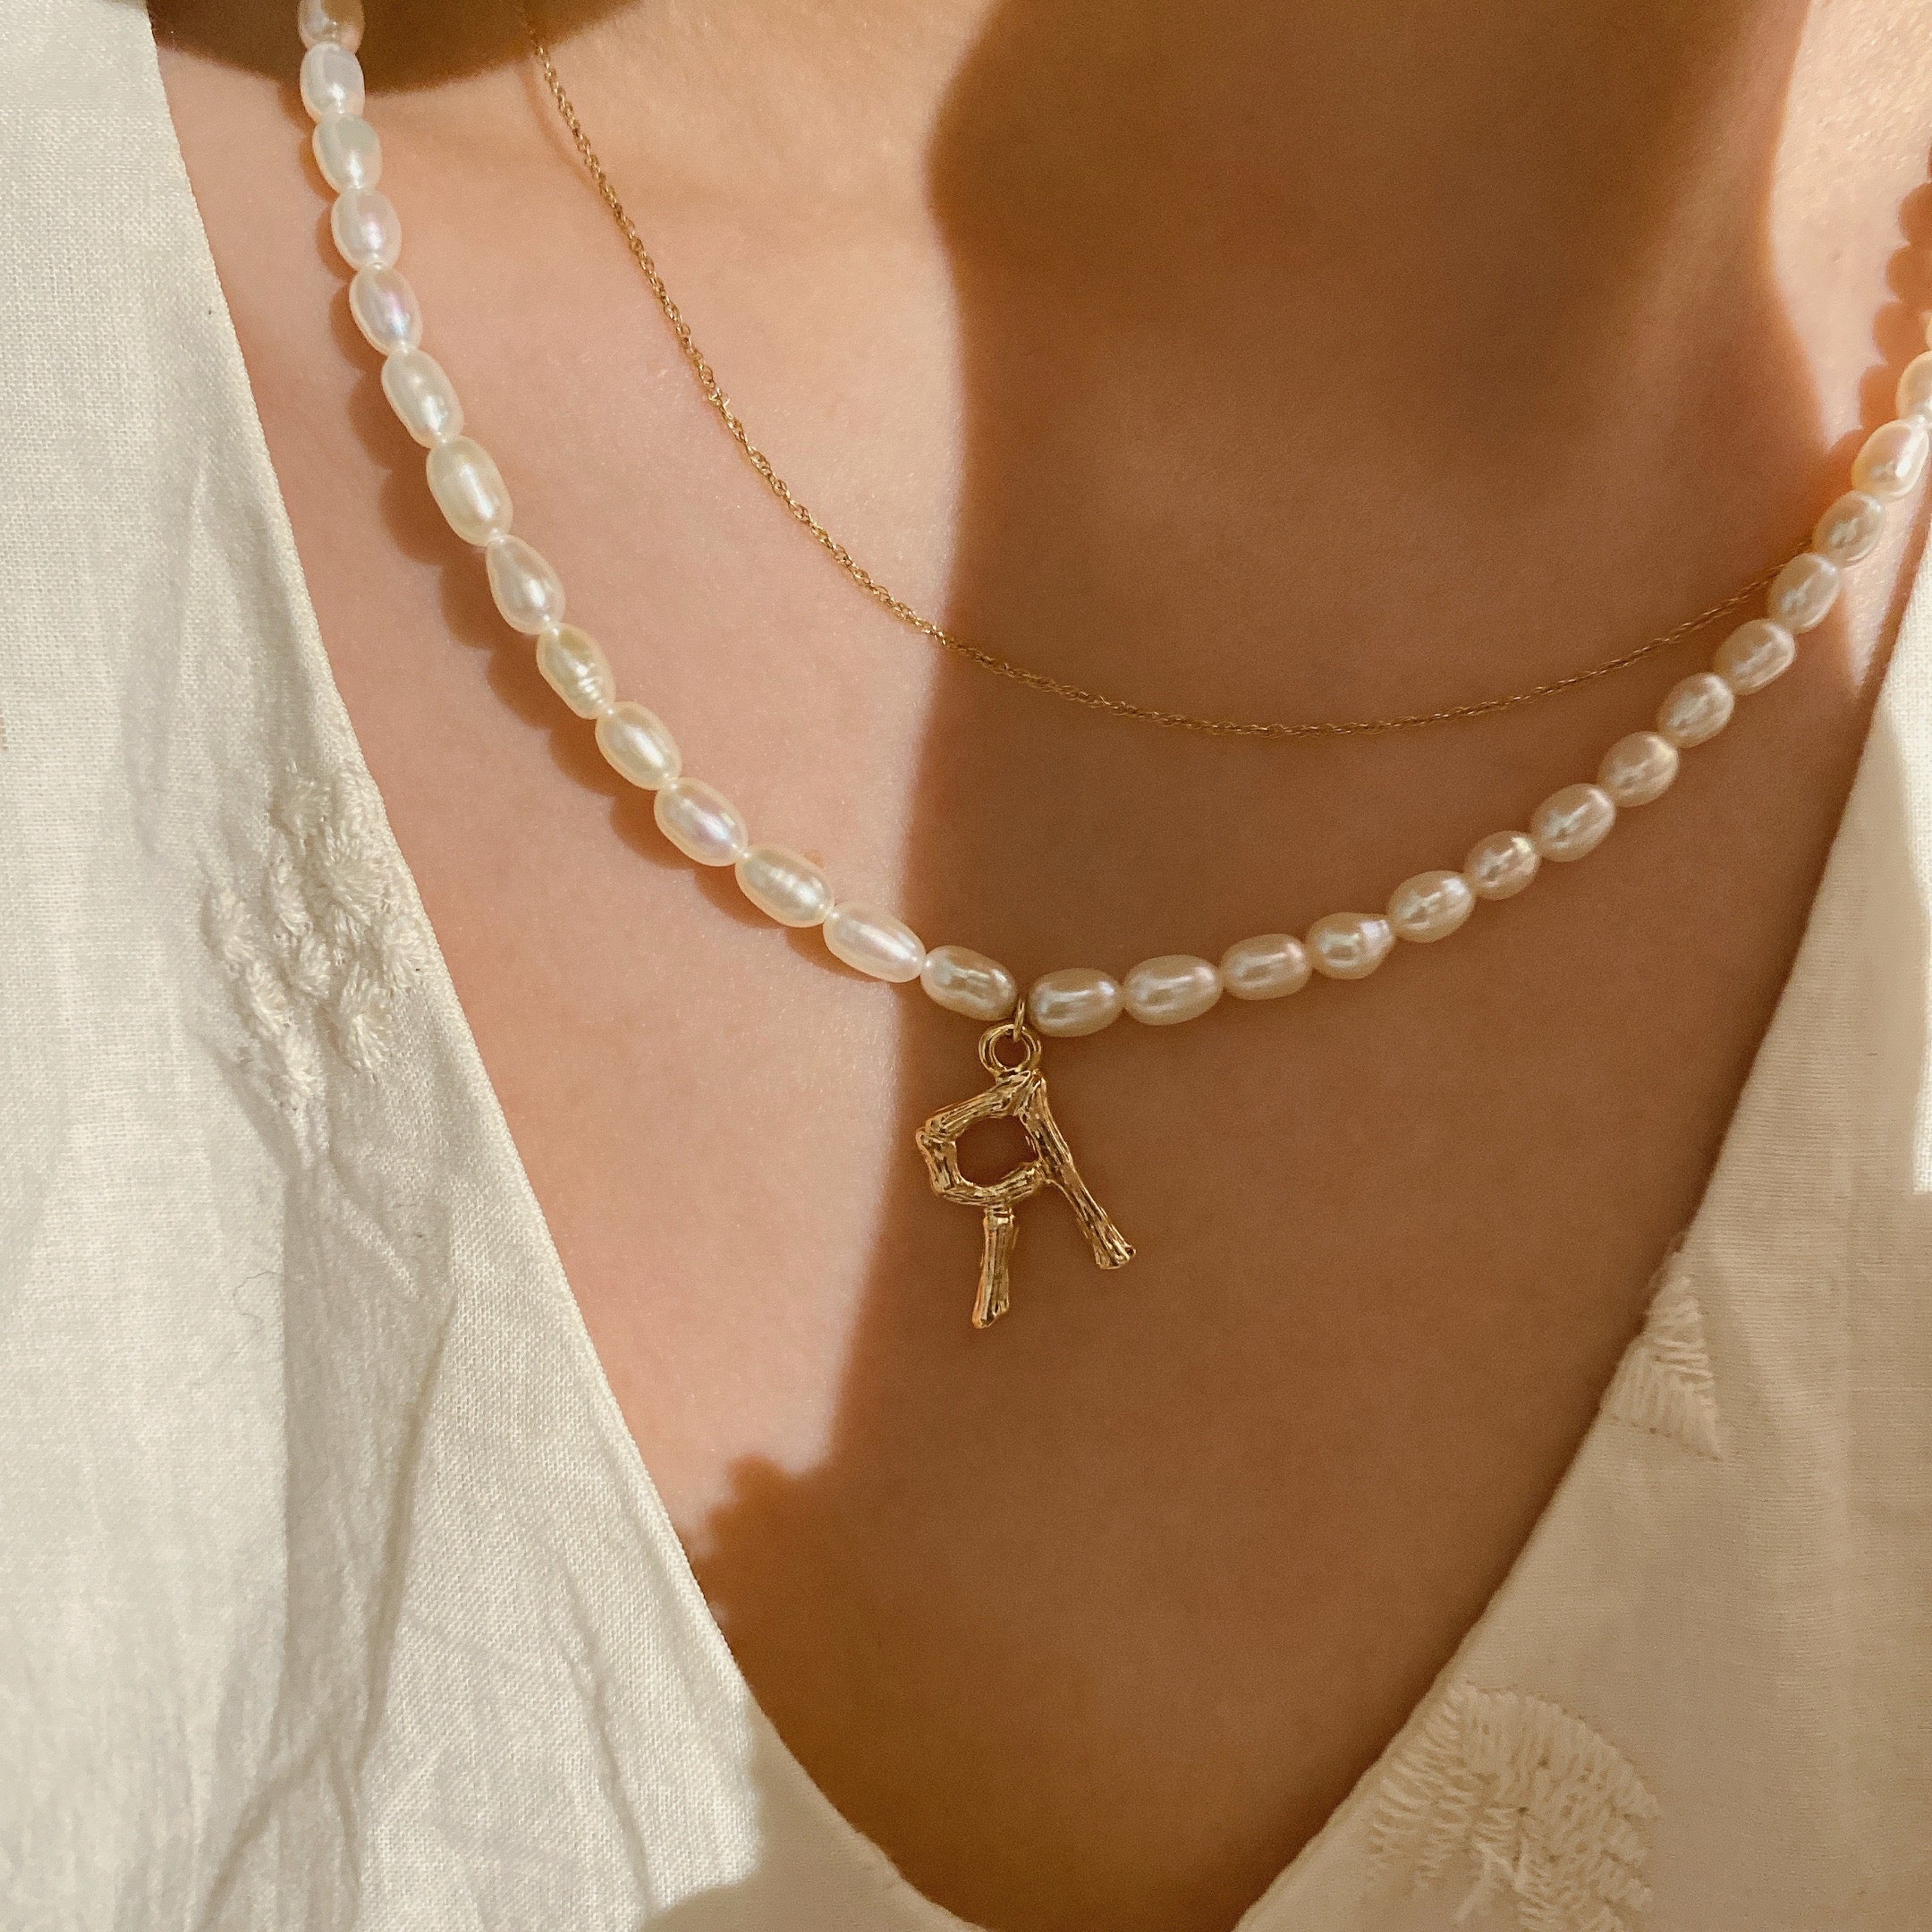 Handmade Natural Pearls 14K Gold-Covered Letter Necklace